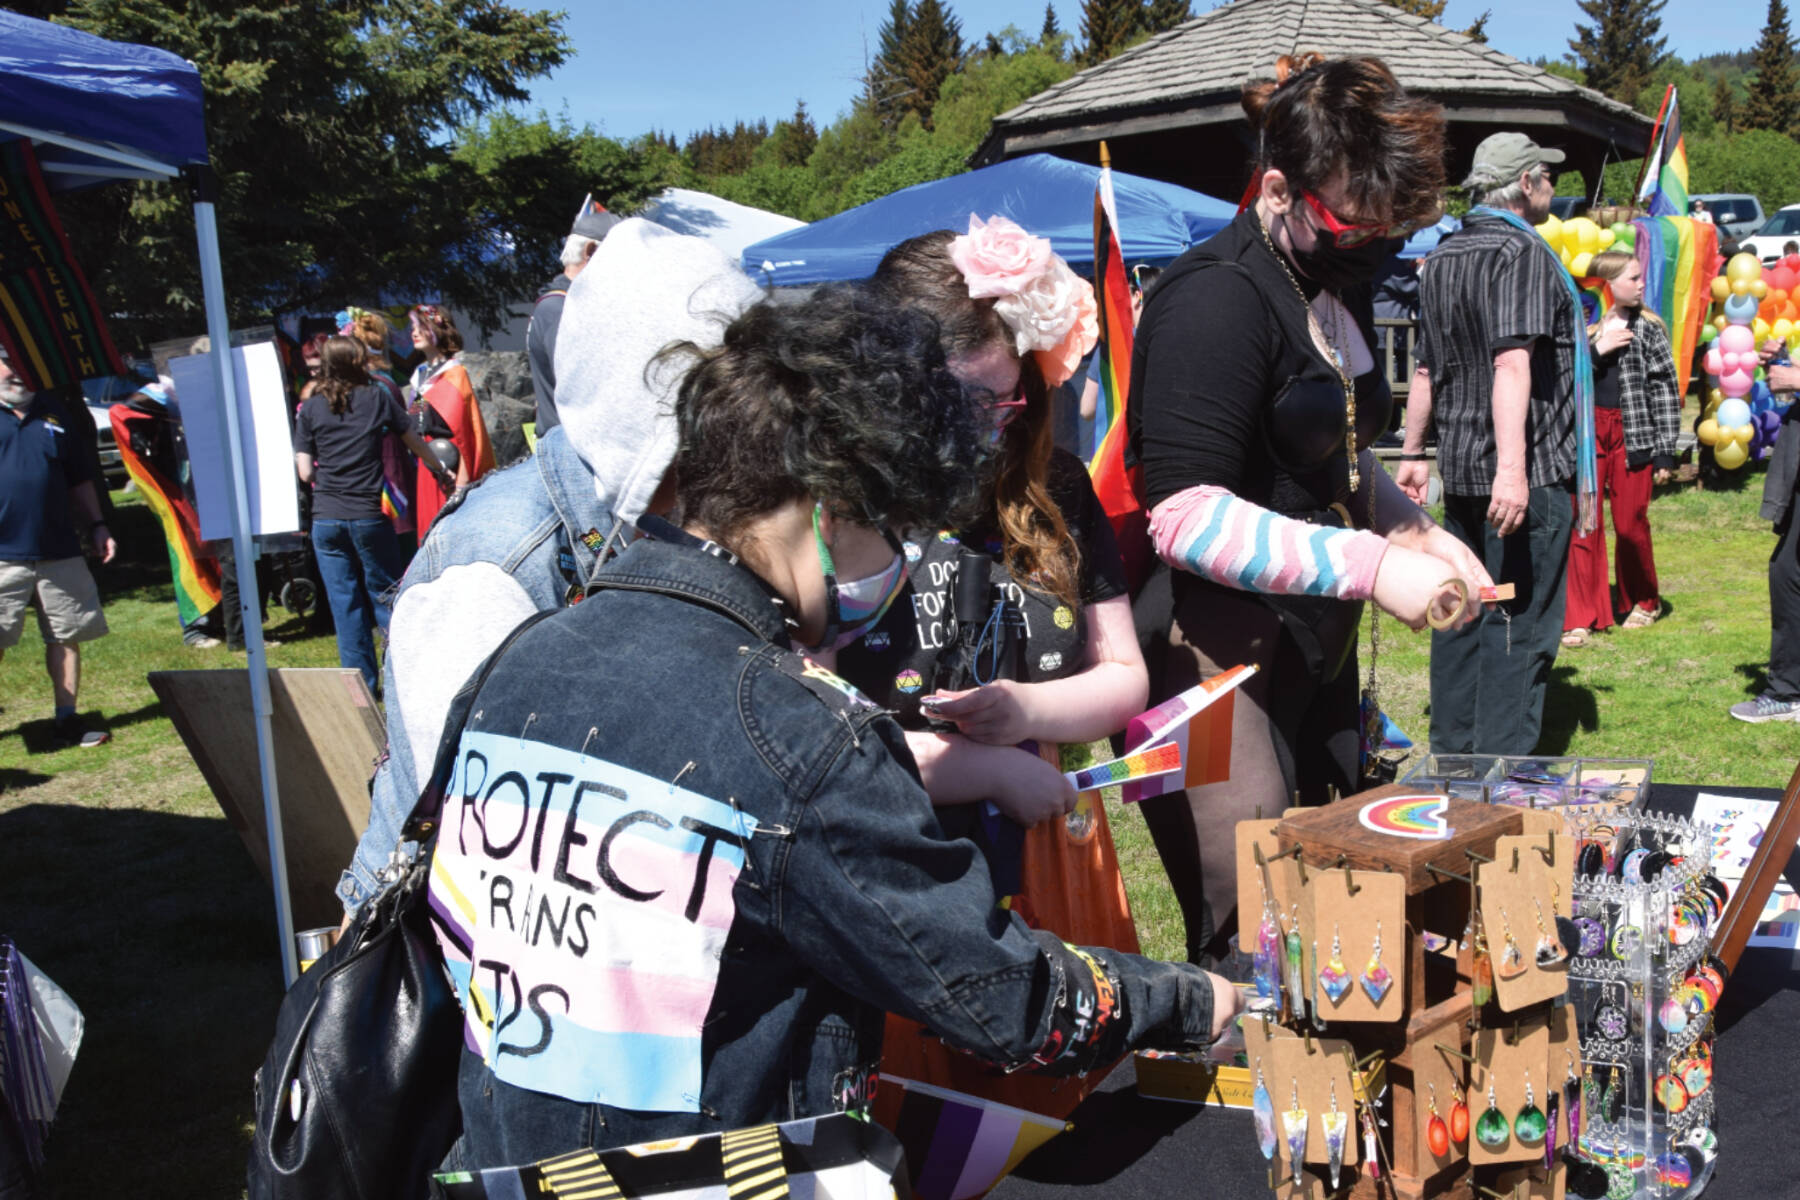 Attendees of the Homer Pride and Juneteenth Liberation Celebration browse for handcrafted merch by Kachemak Bay Crafters at WKFL Park on Saturday, June 17, 2023 in Homer, Alaska. (Delcenia Cosman/Homer News)